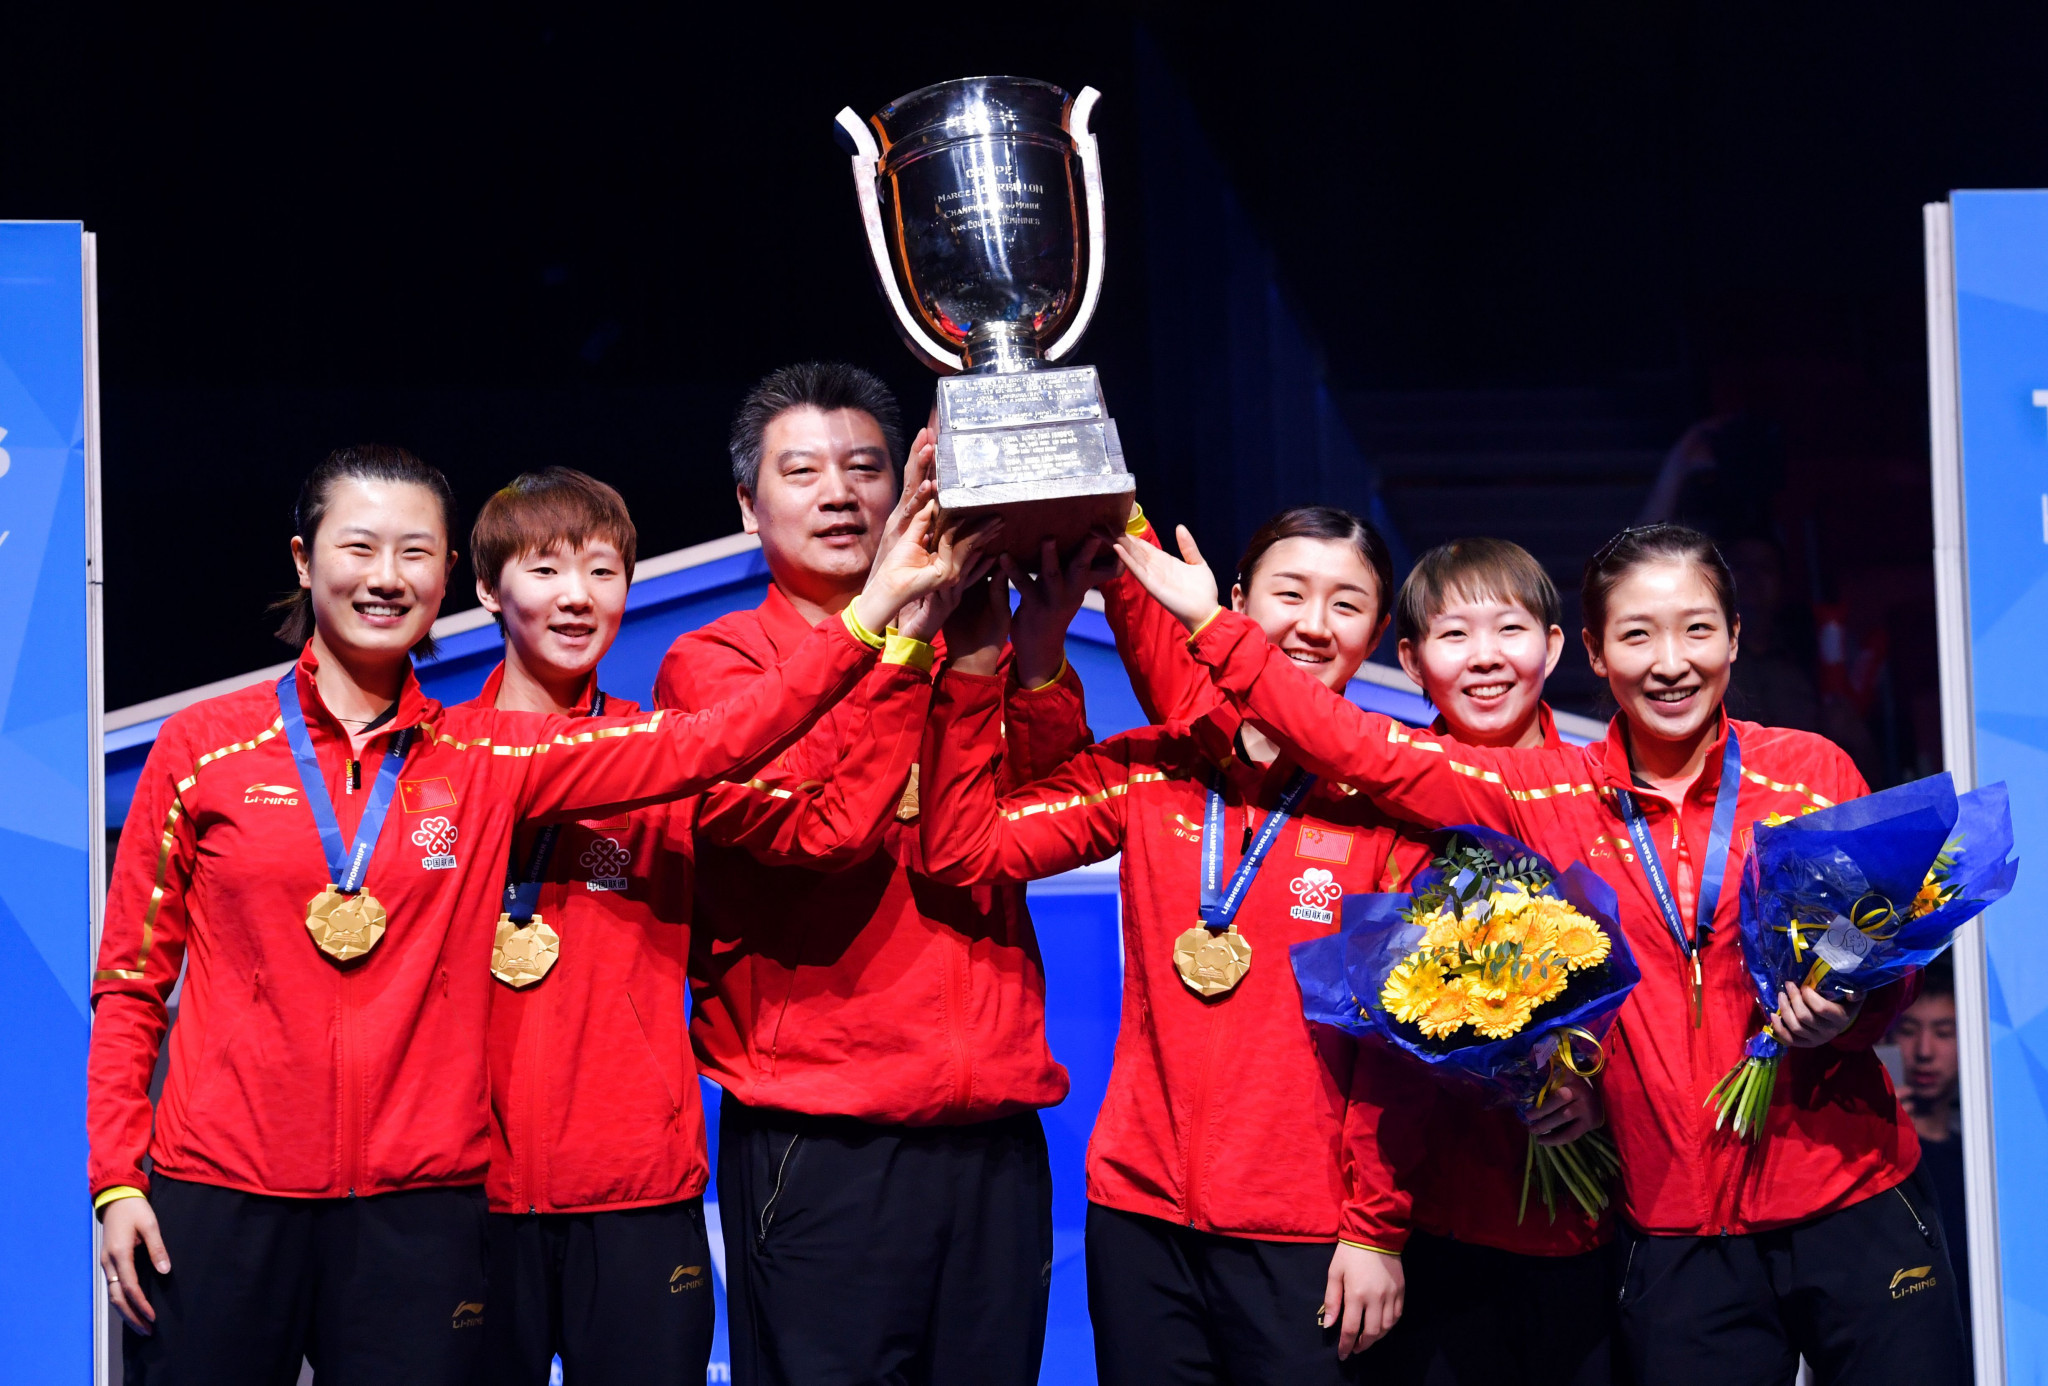 Chinese women come from behind to win ITTF World Team Championships title